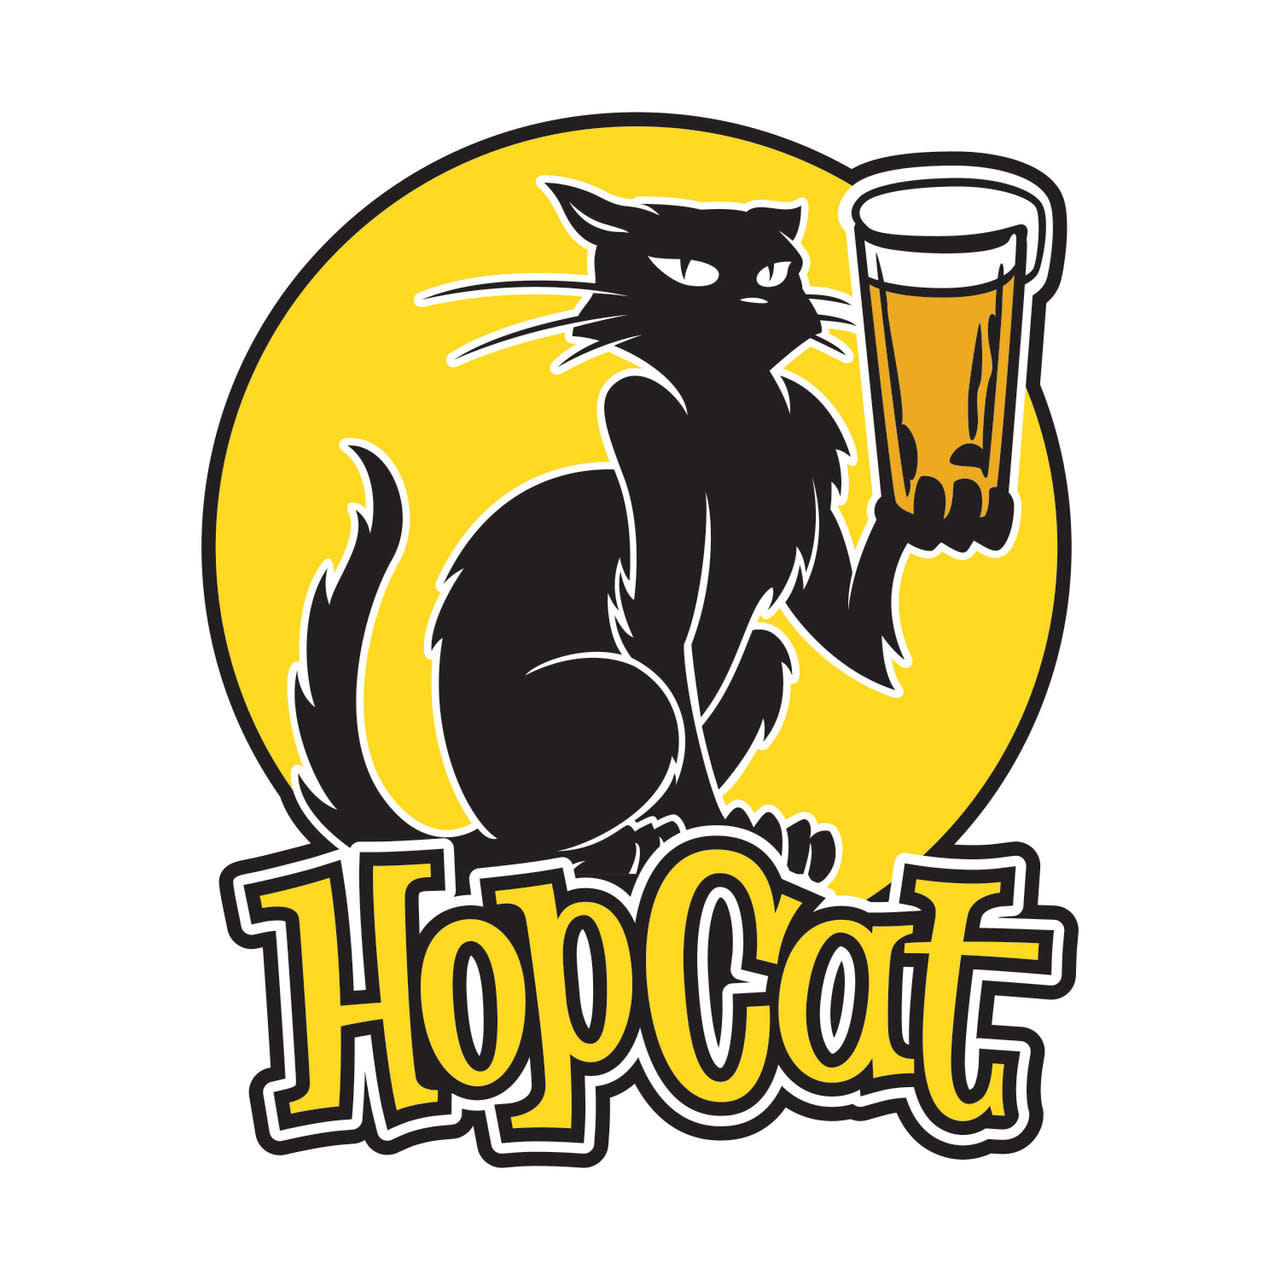 Image result for hopcat small logo"